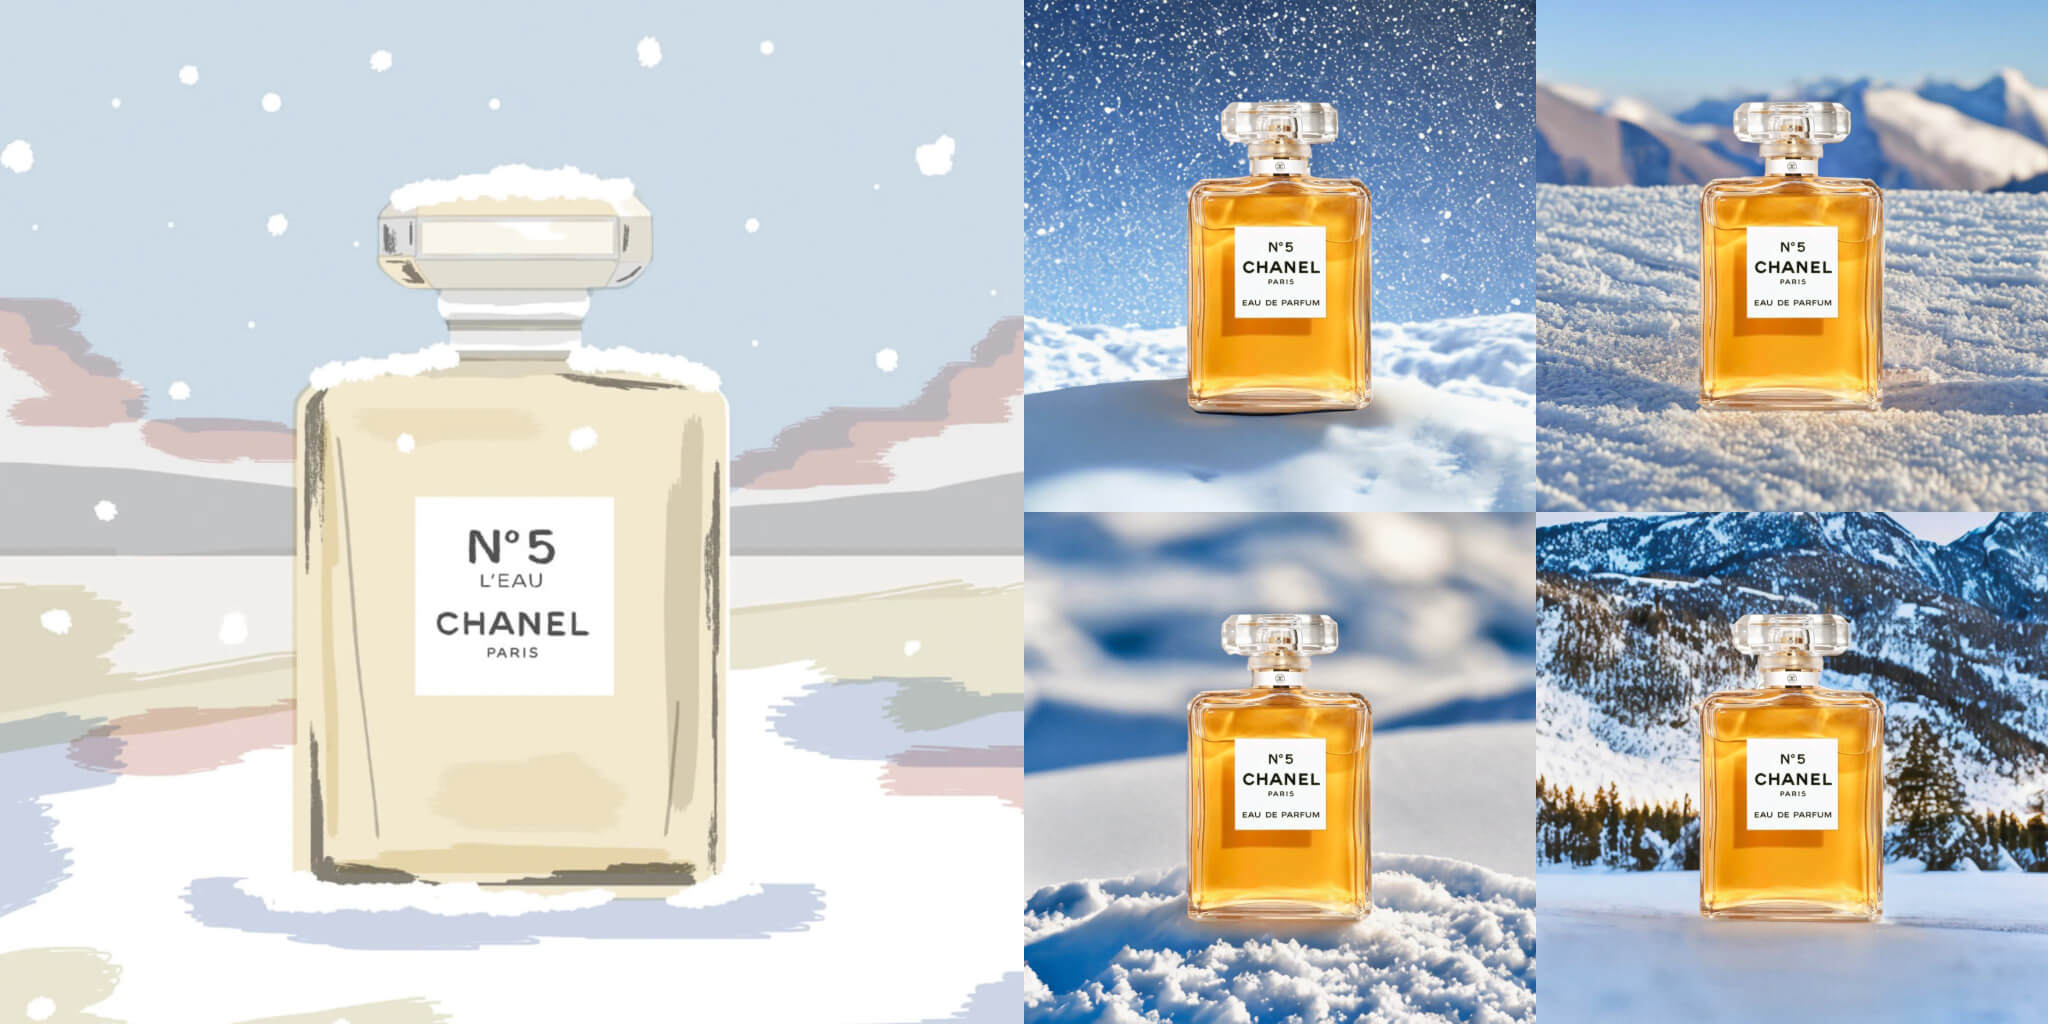 CHANEL N°5 product images